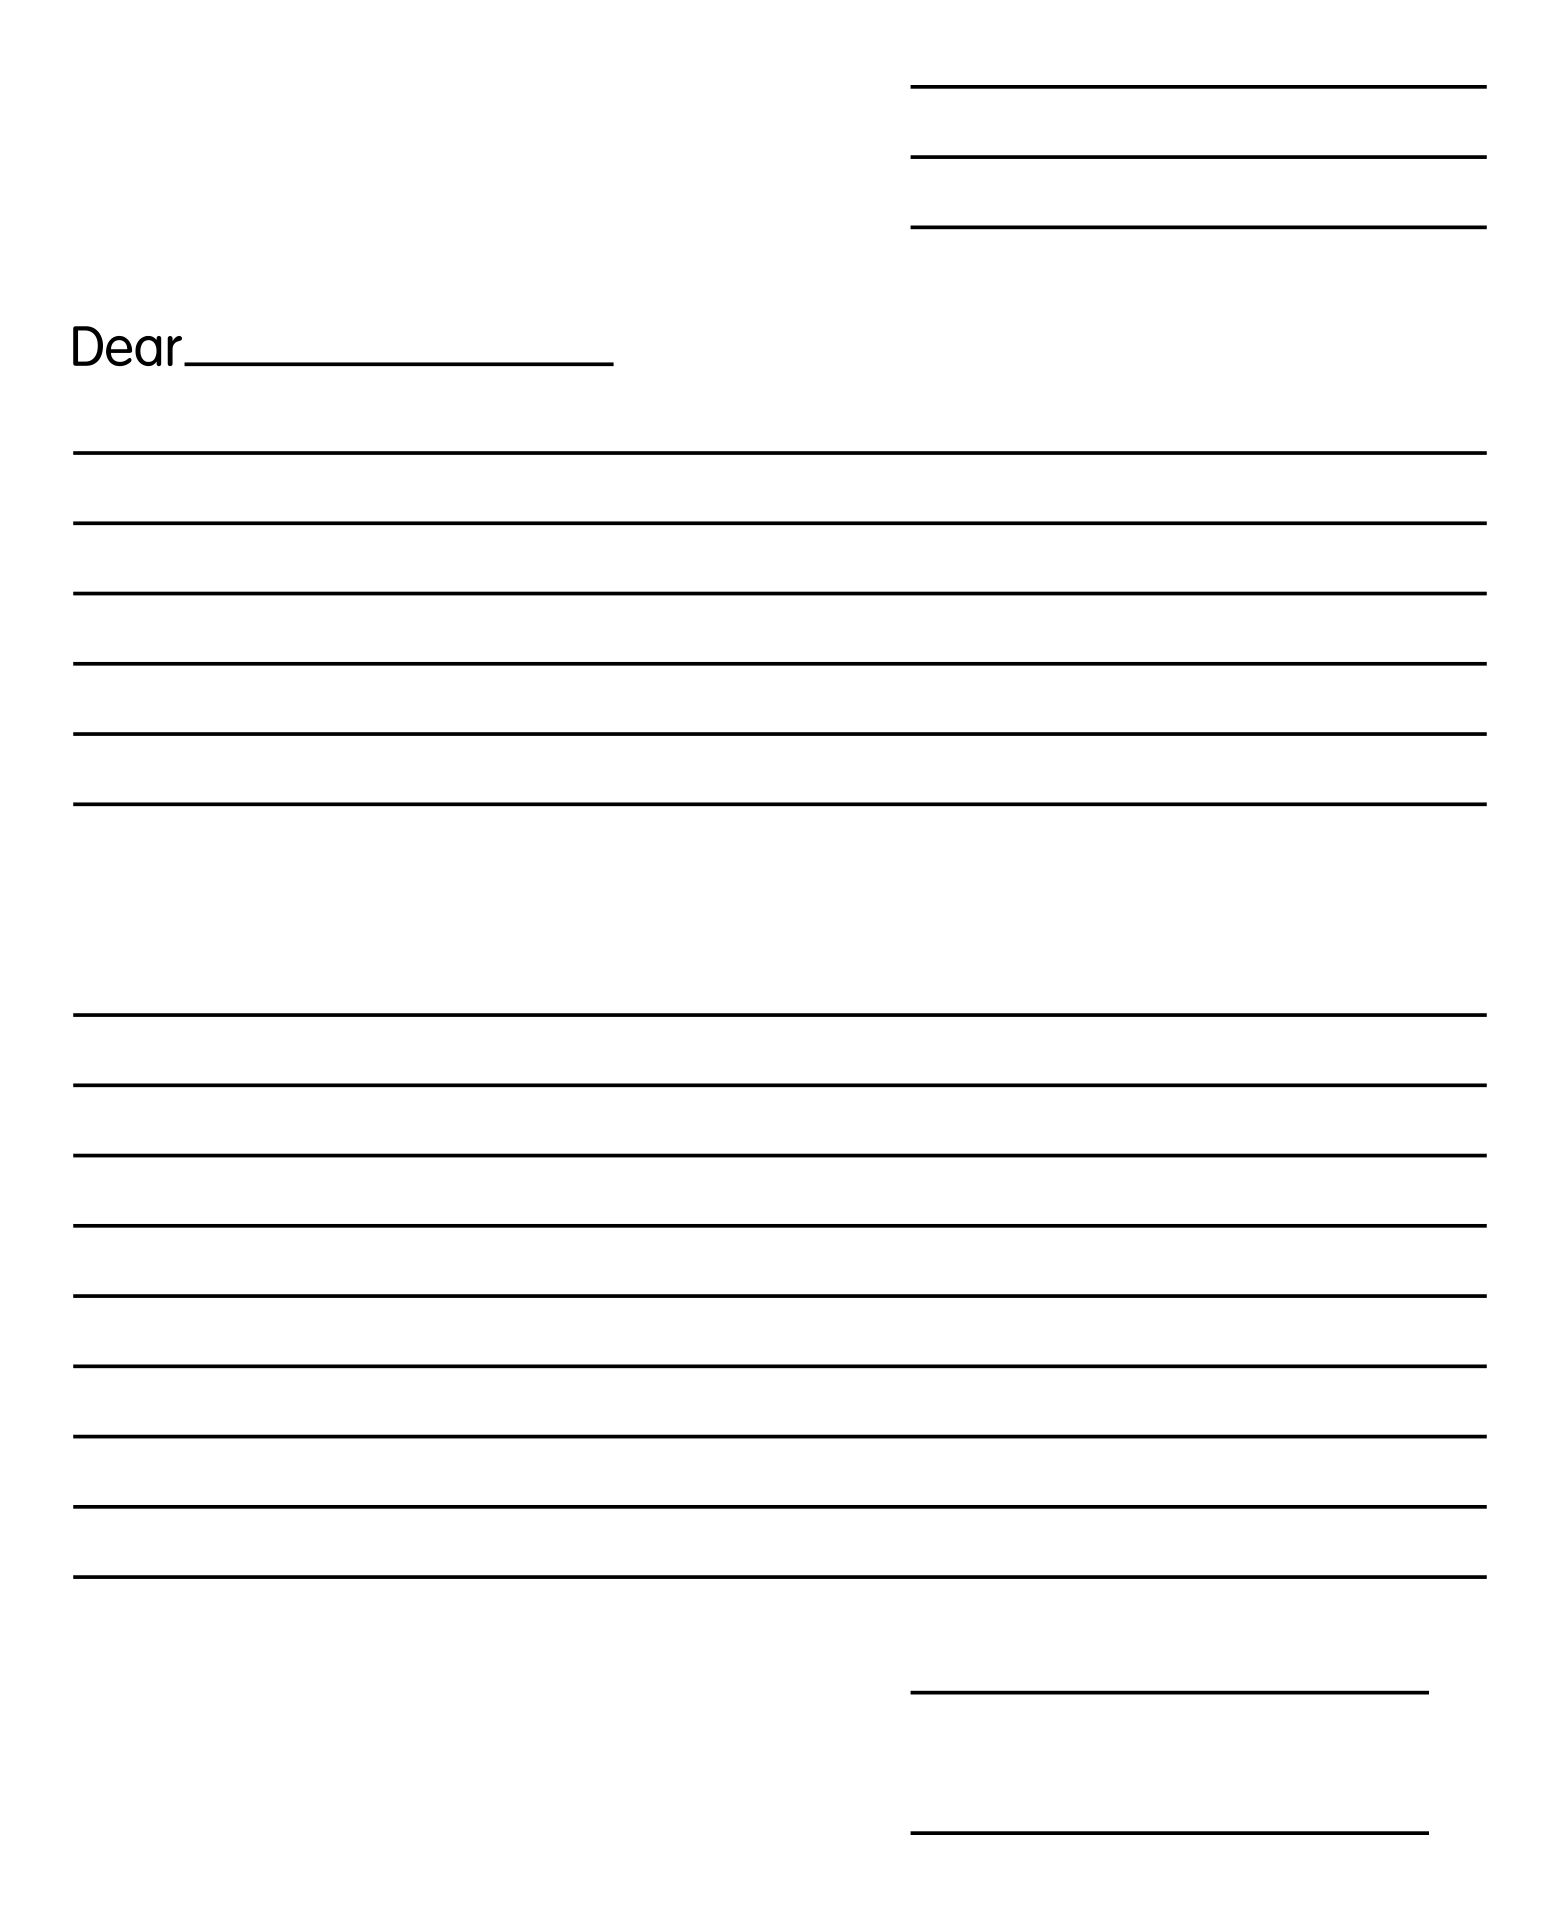 free-fillable-letter-templates